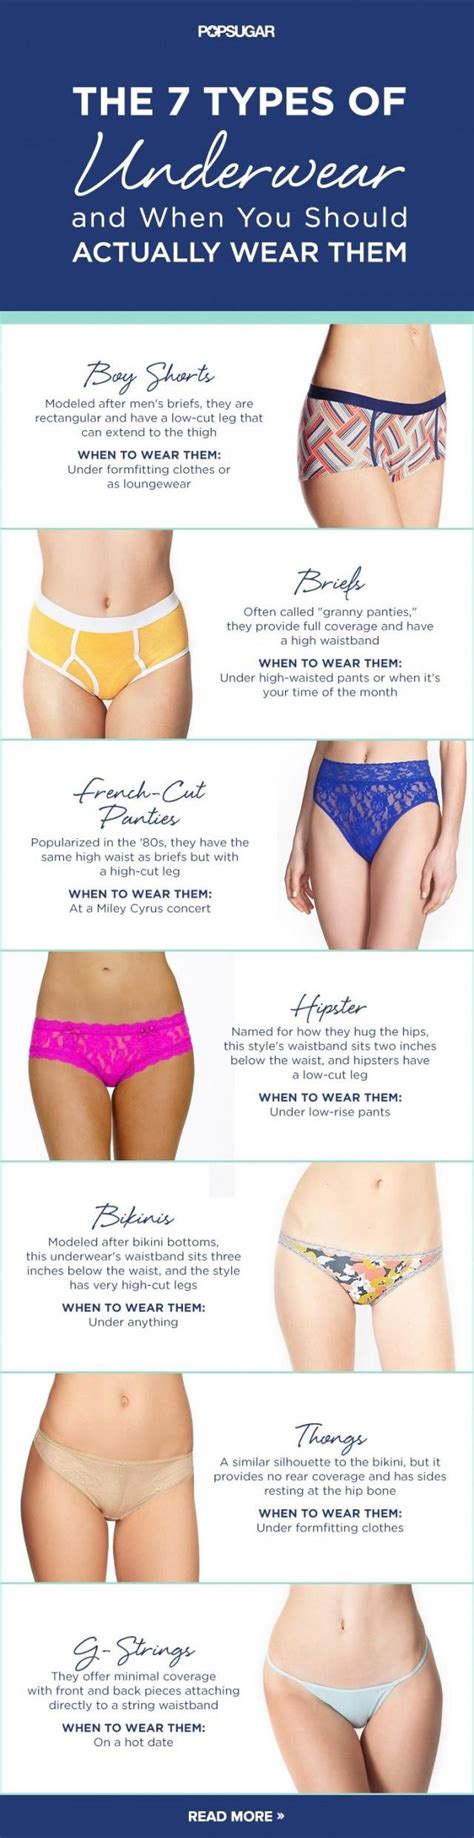 the 7 types of underwear and when you should actually wear them 2415770 weddbook